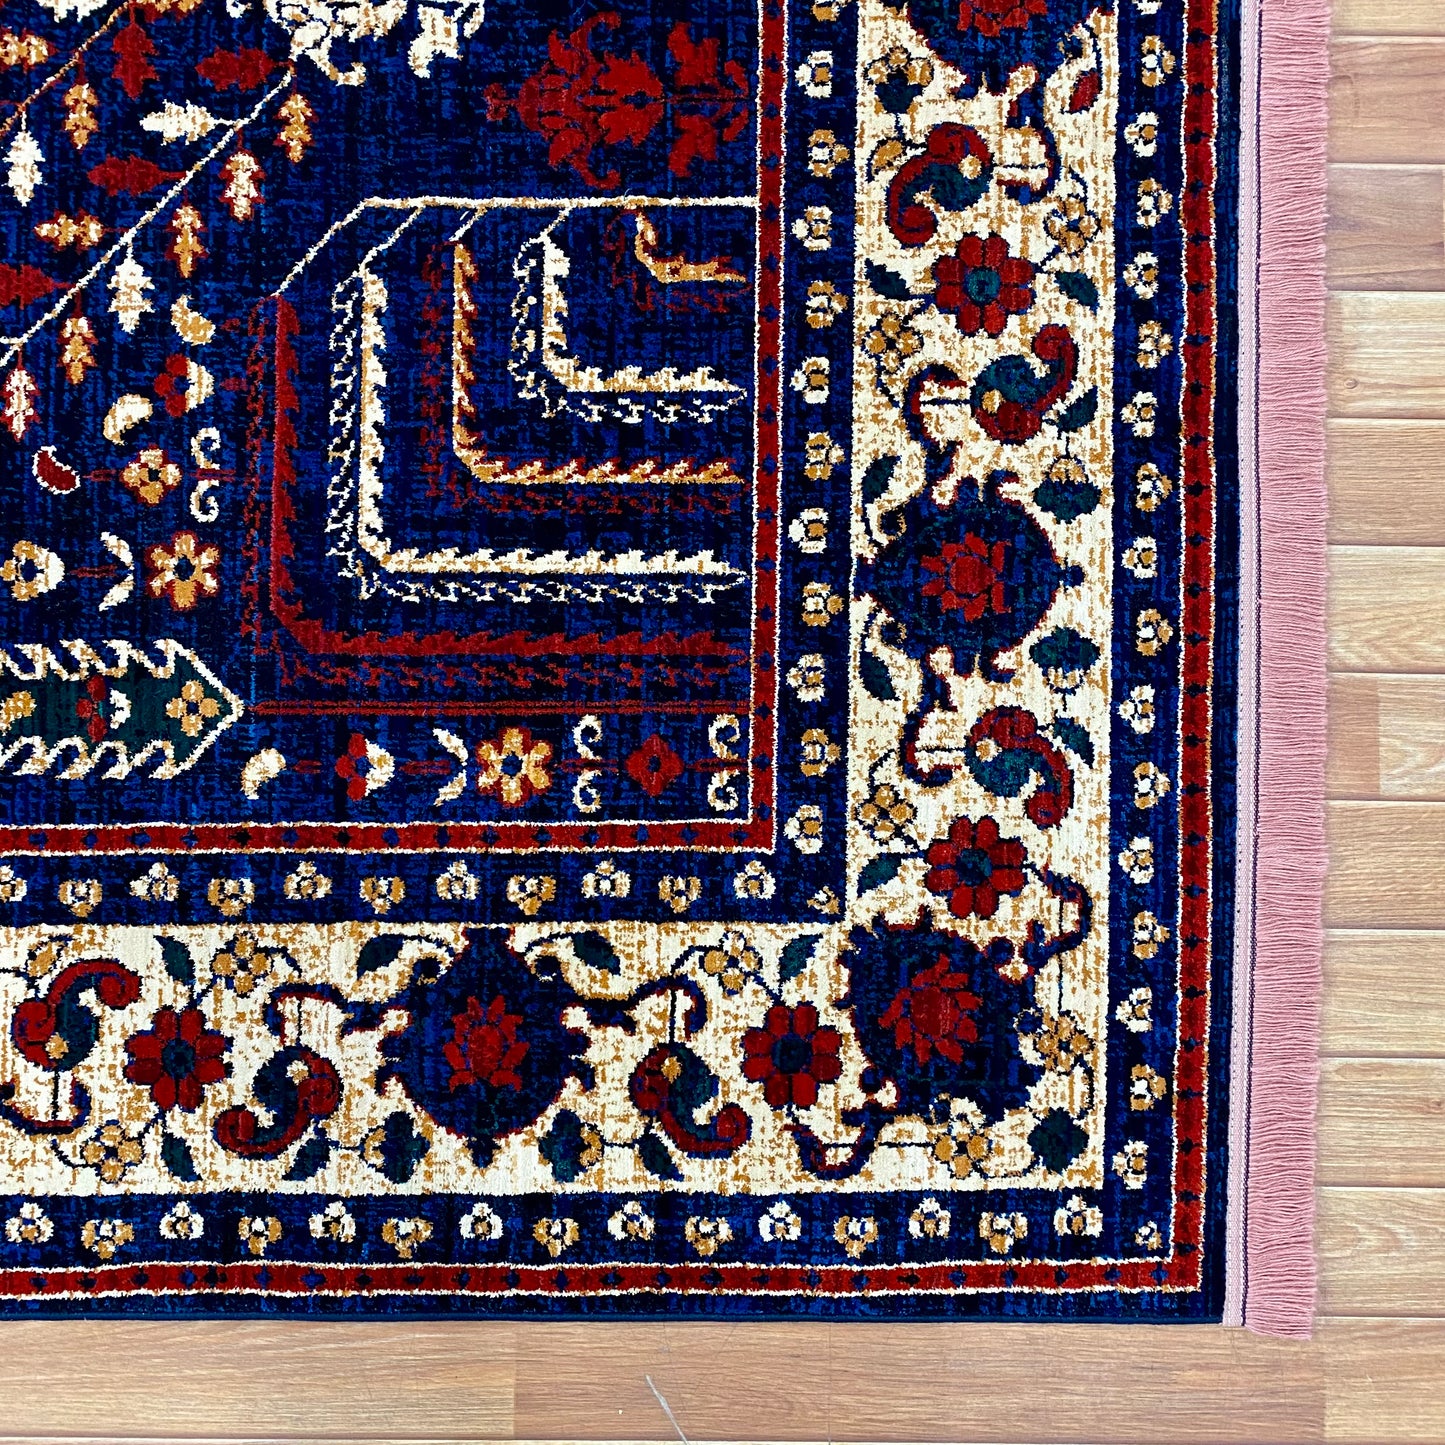 7 ft x 10 ft - Area Rug - Persian Baluchi 1 - Blue and Beige - Timeless Beauty for Your Home